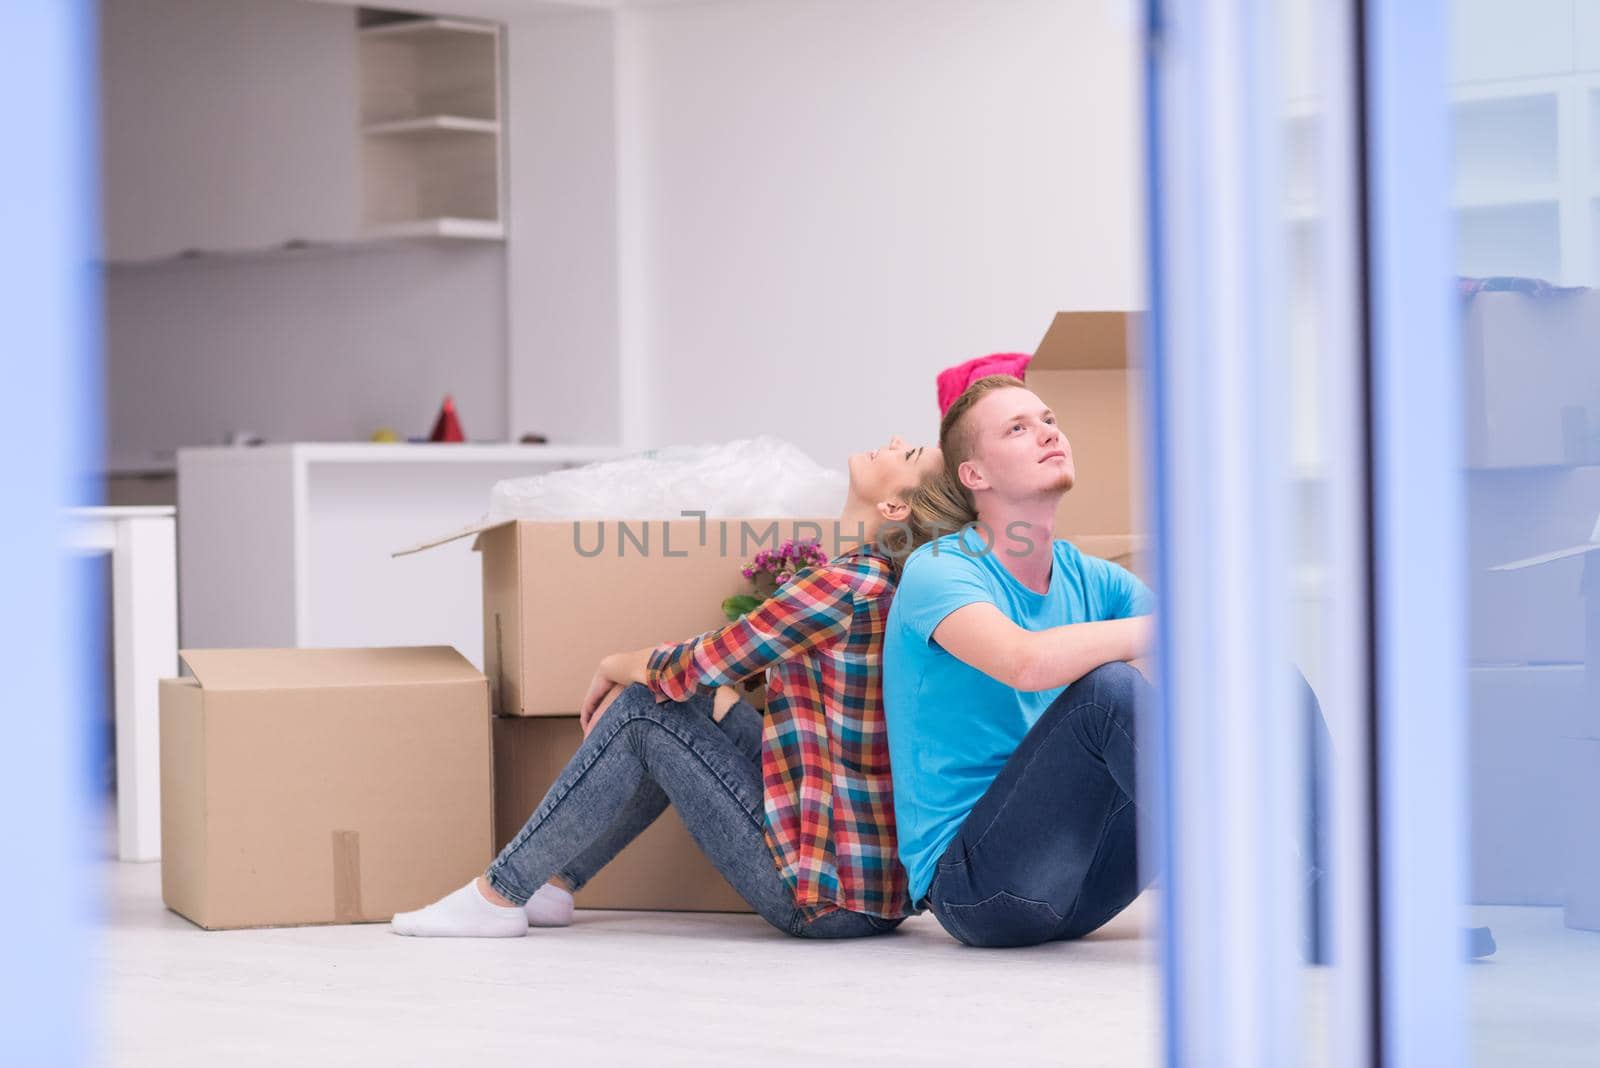 Relaxing in new house. Cheerful young couple sitting on the floor while cardboard boxes laying all around them